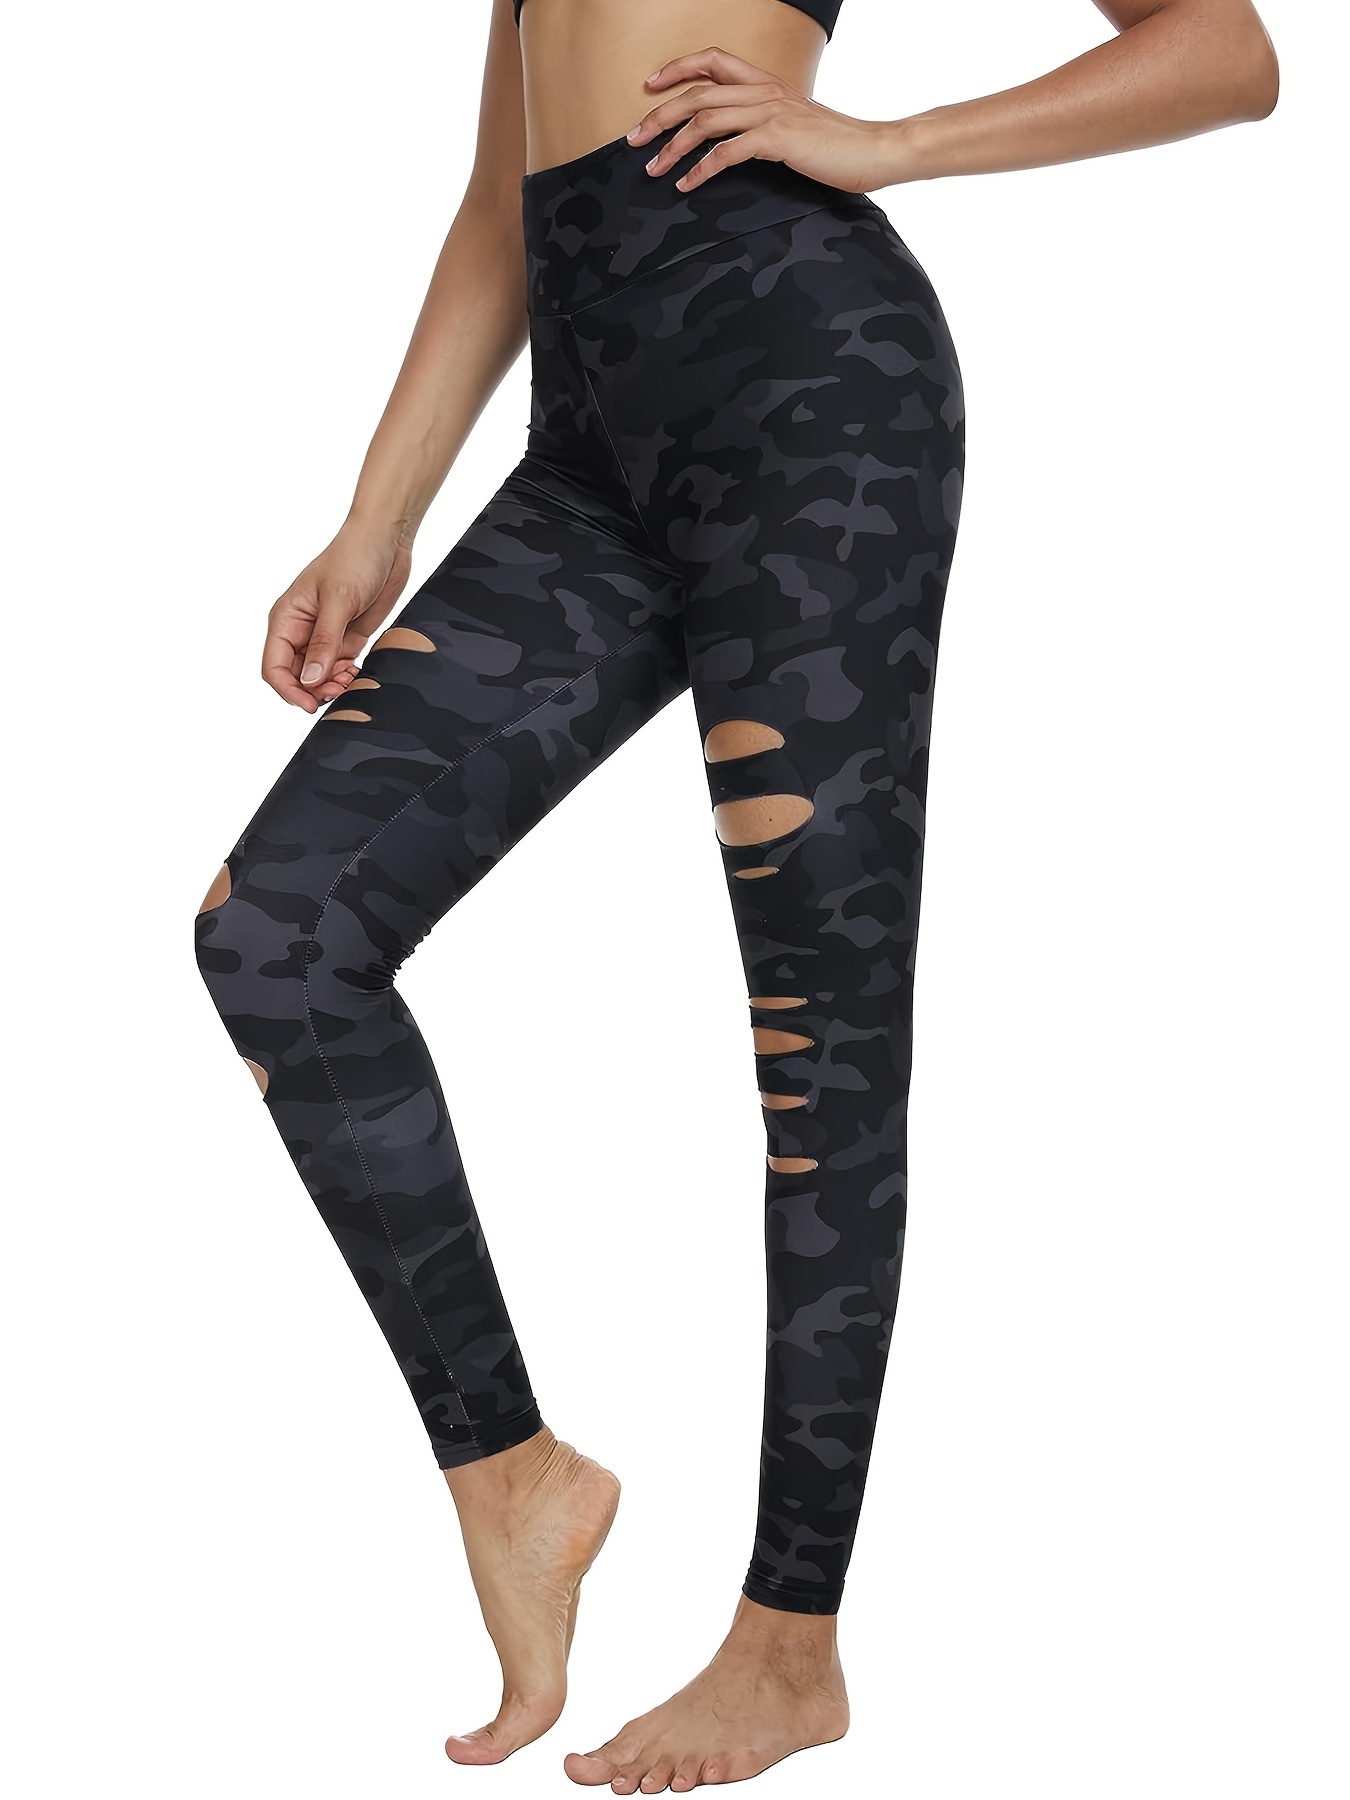 Hollow Out High Waist Ripped Leggings, Sports Fitness Yoga Running Pants,  Women's Activewear